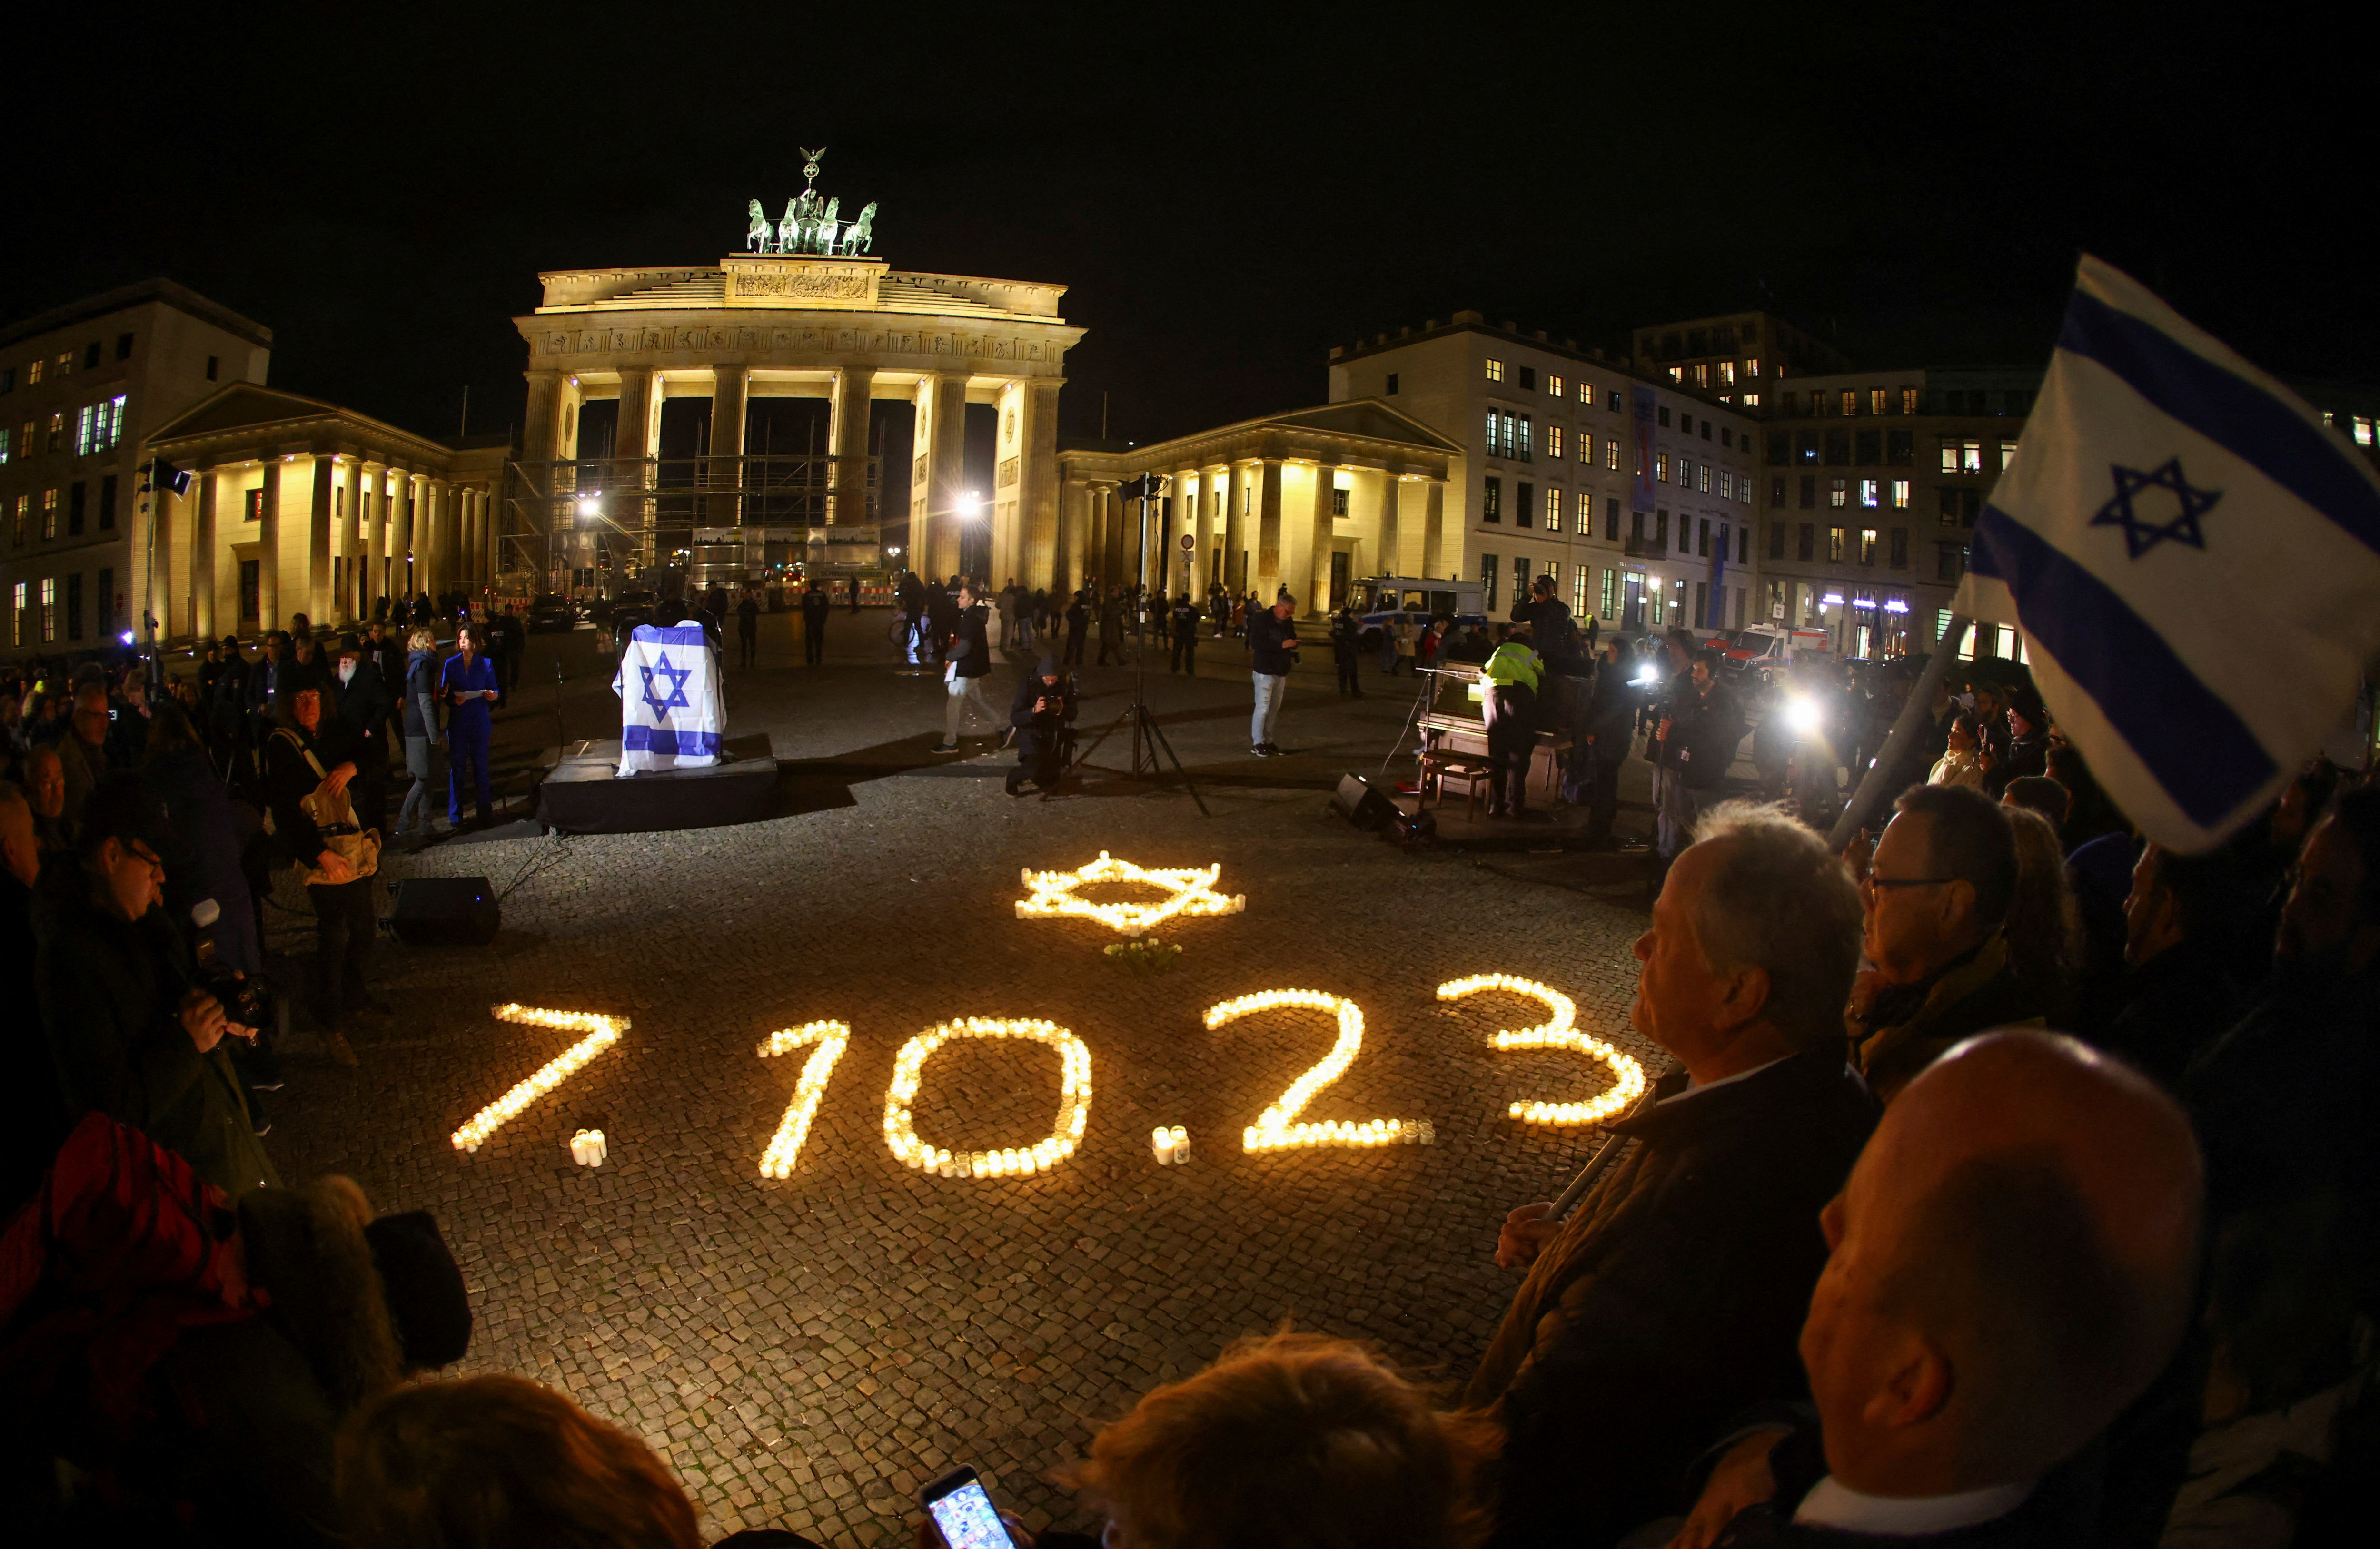 People commemorate the victims of Hamas' attack in front of Brandenburg gate in Berlin